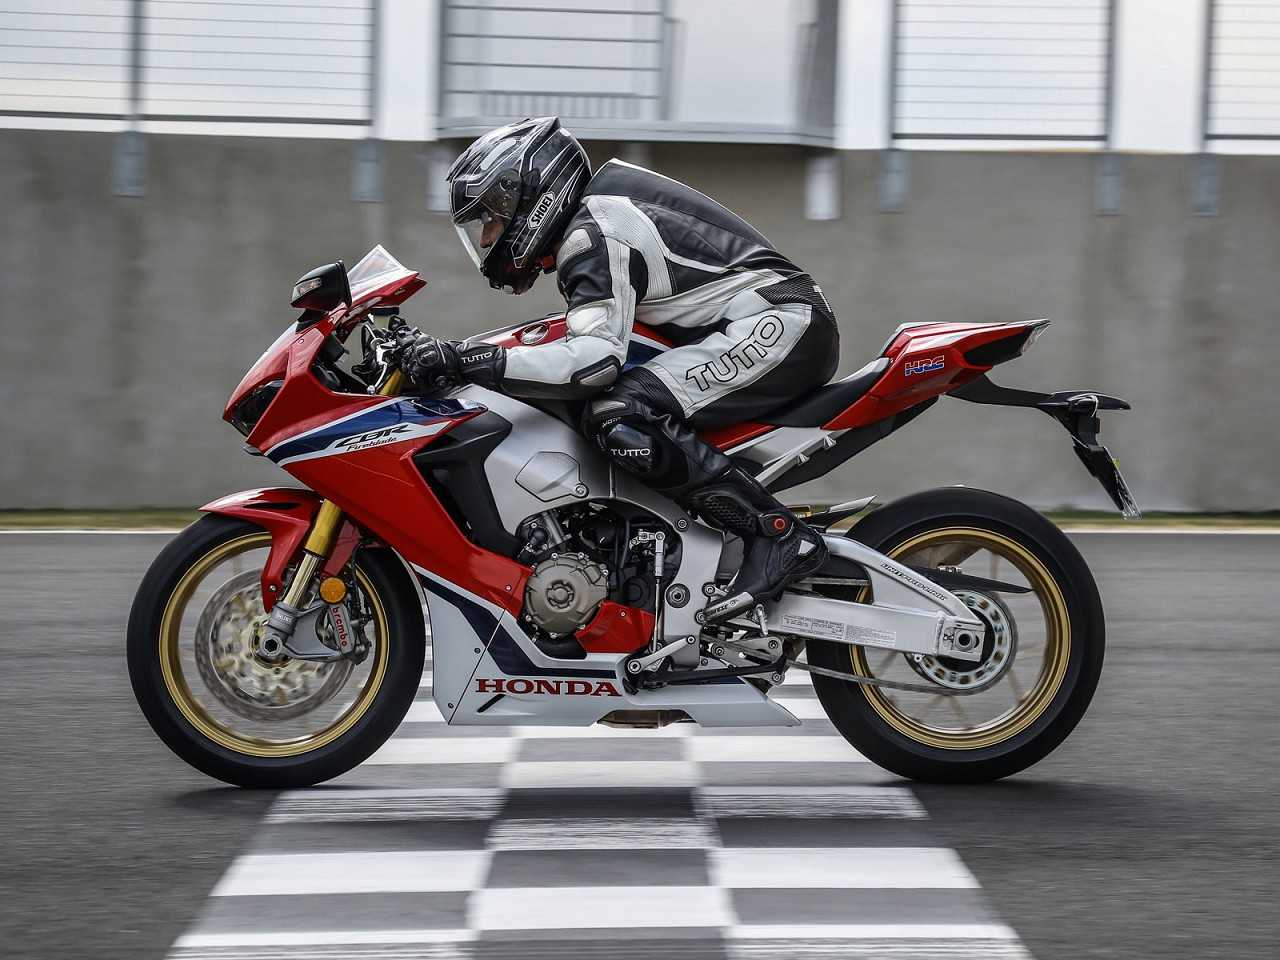 HondaCBR 1000RR 2018 - lateral